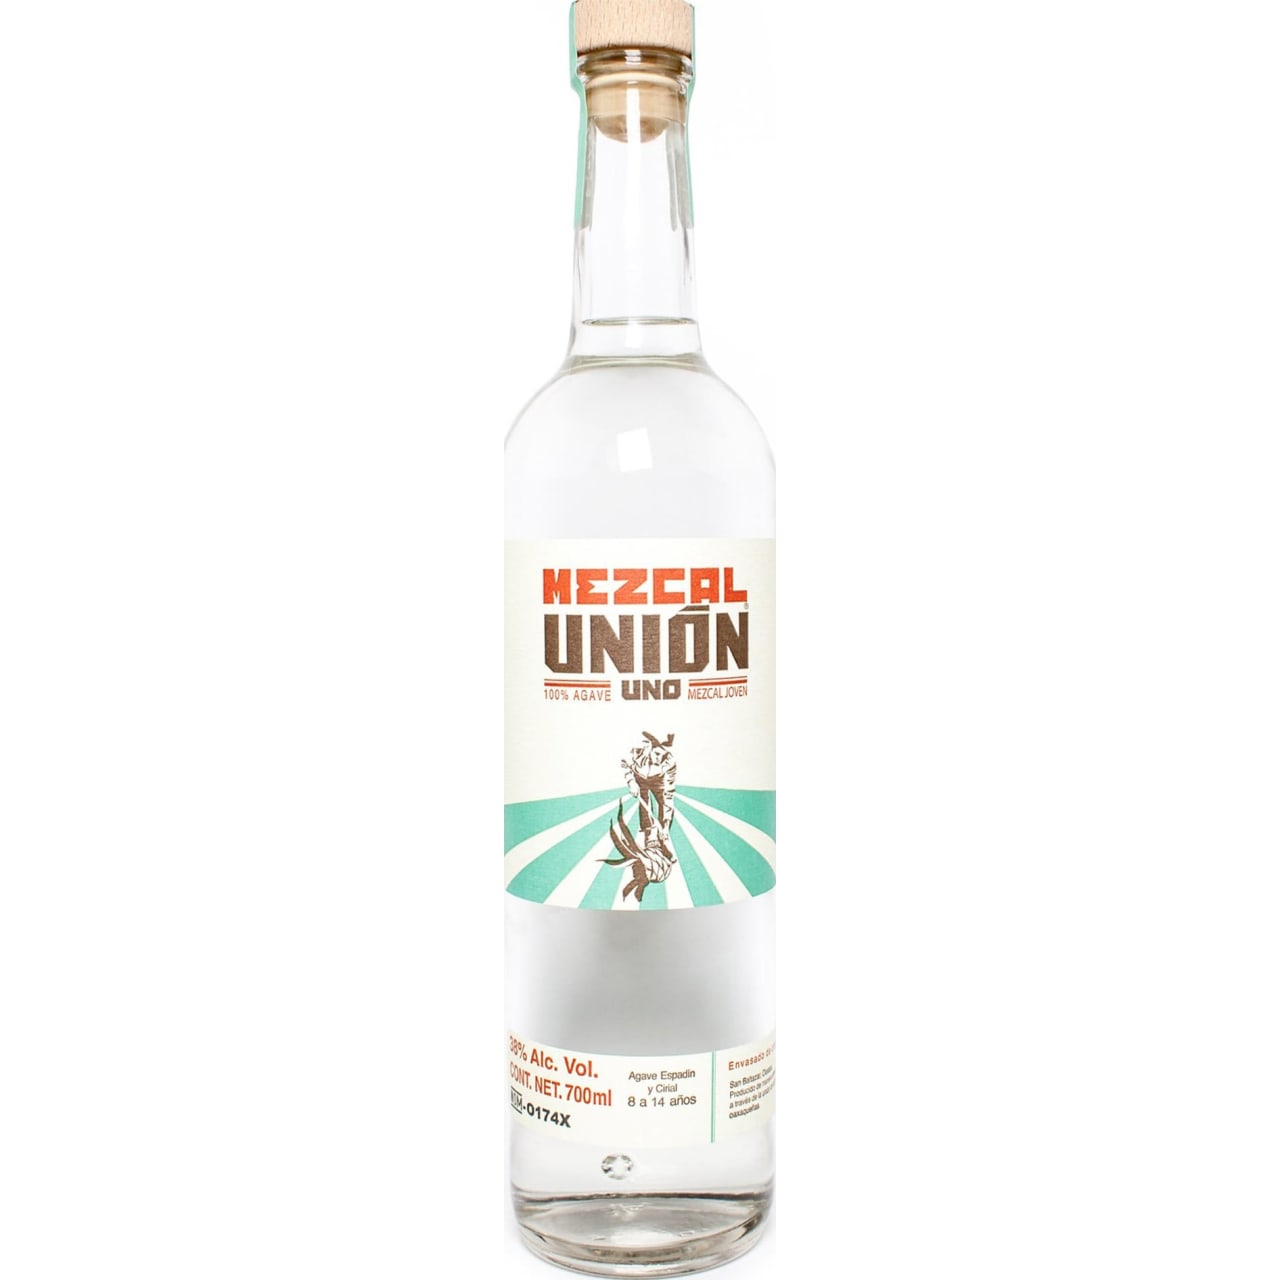 This Mezcal is sweet with notes of Vanilla and a Subtle Floral body with plenty of Toasted Smokey Agave to finish.